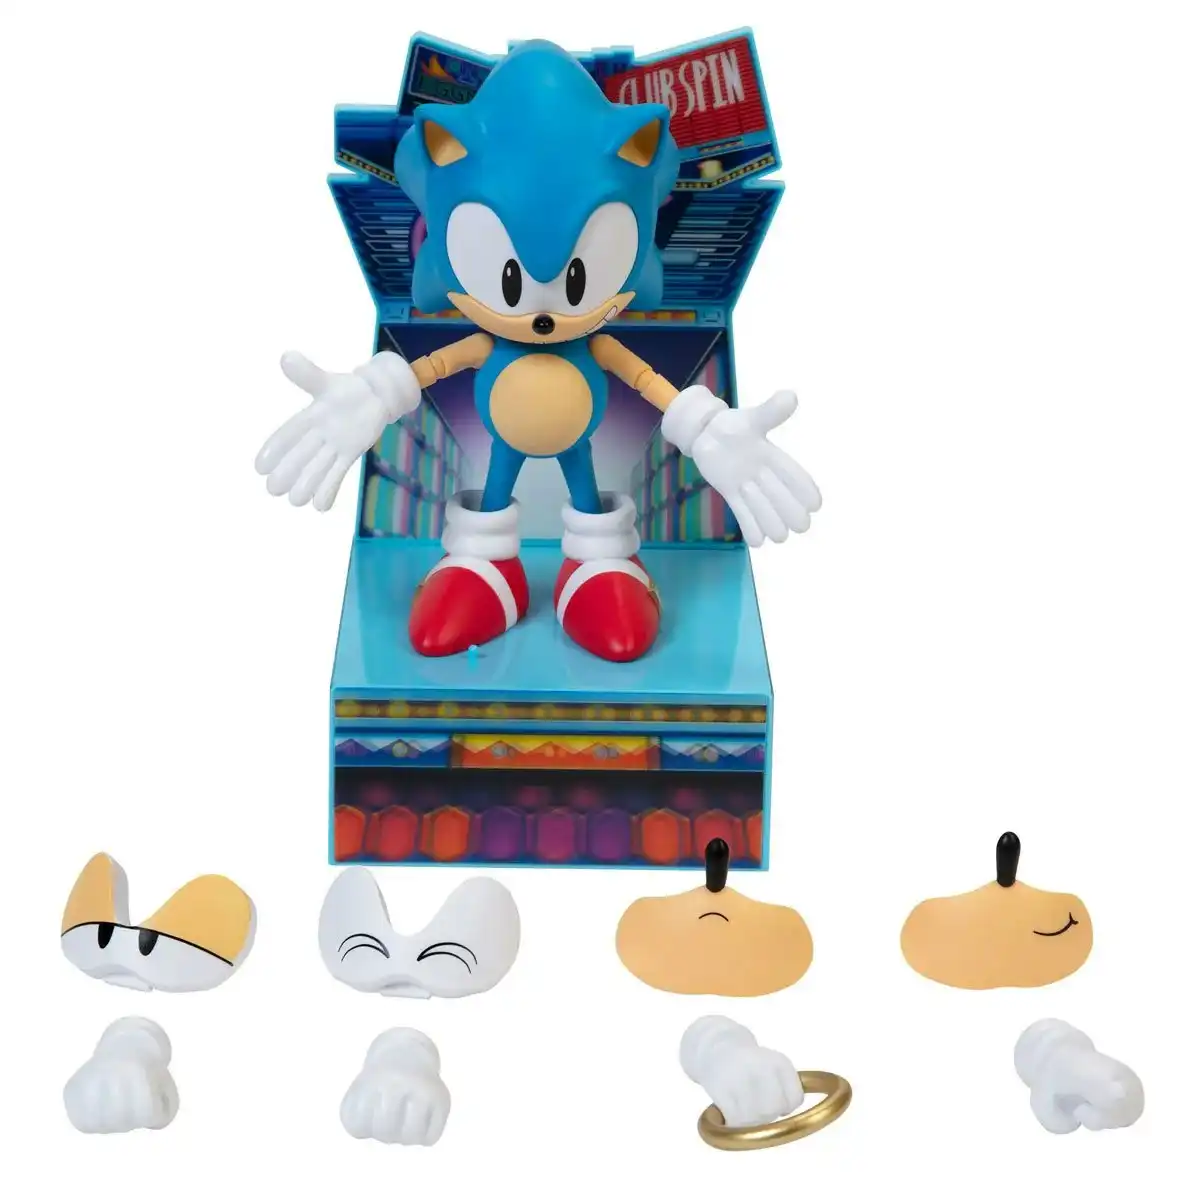 Sonic 6" Collectible Figure